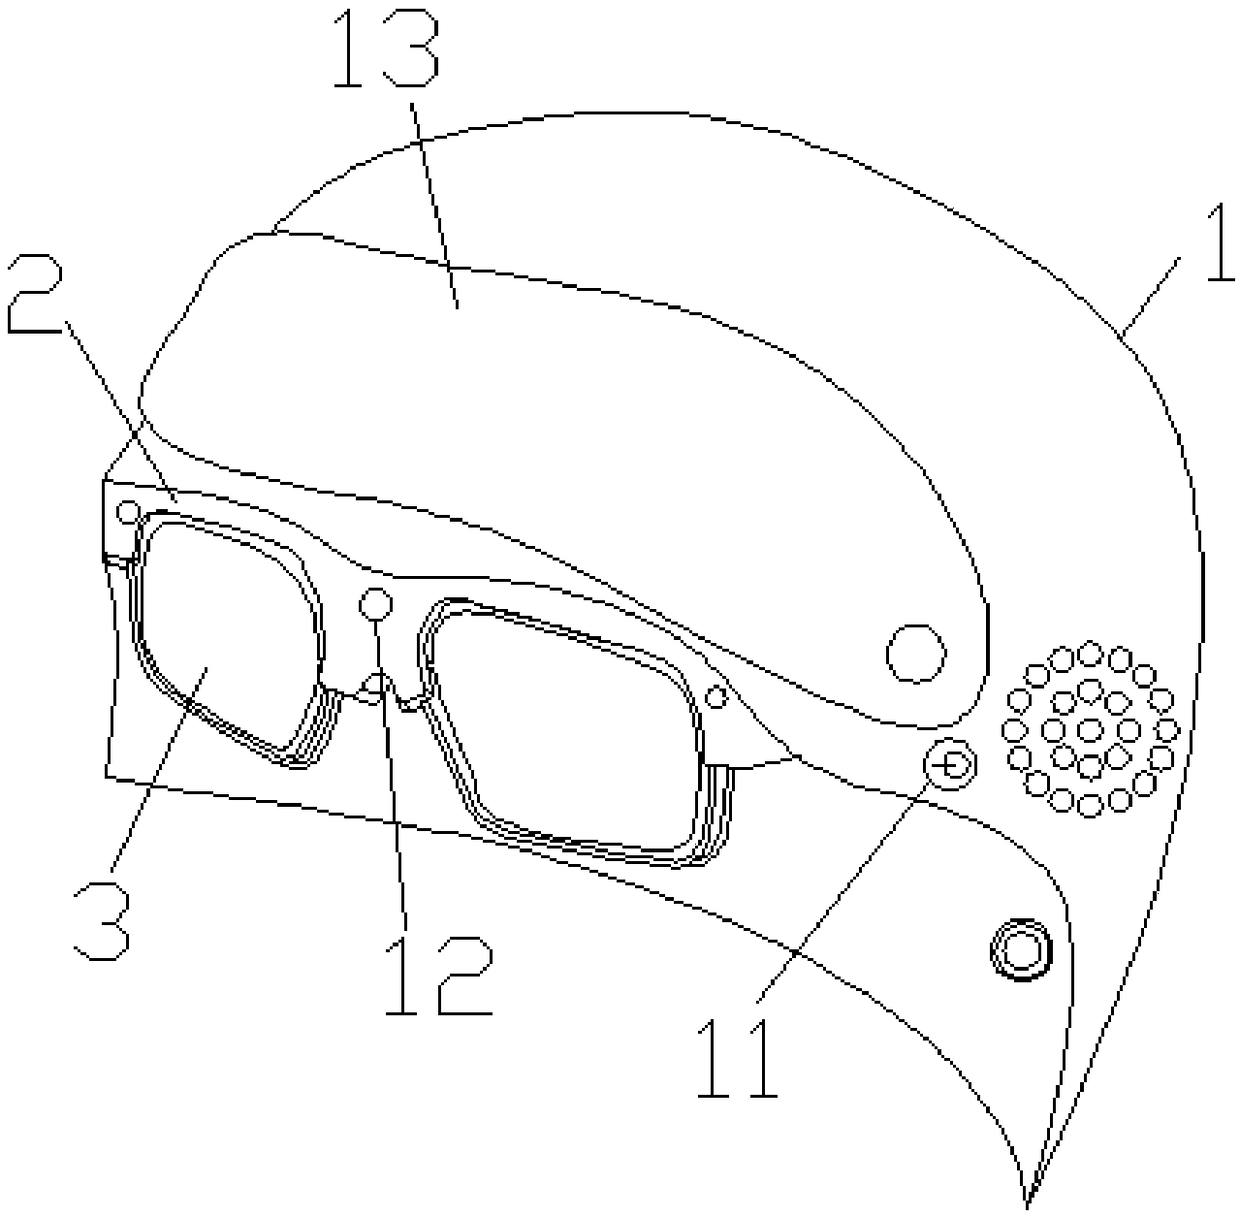 Manual hydraulic adjustment view field and vision zoom helmet